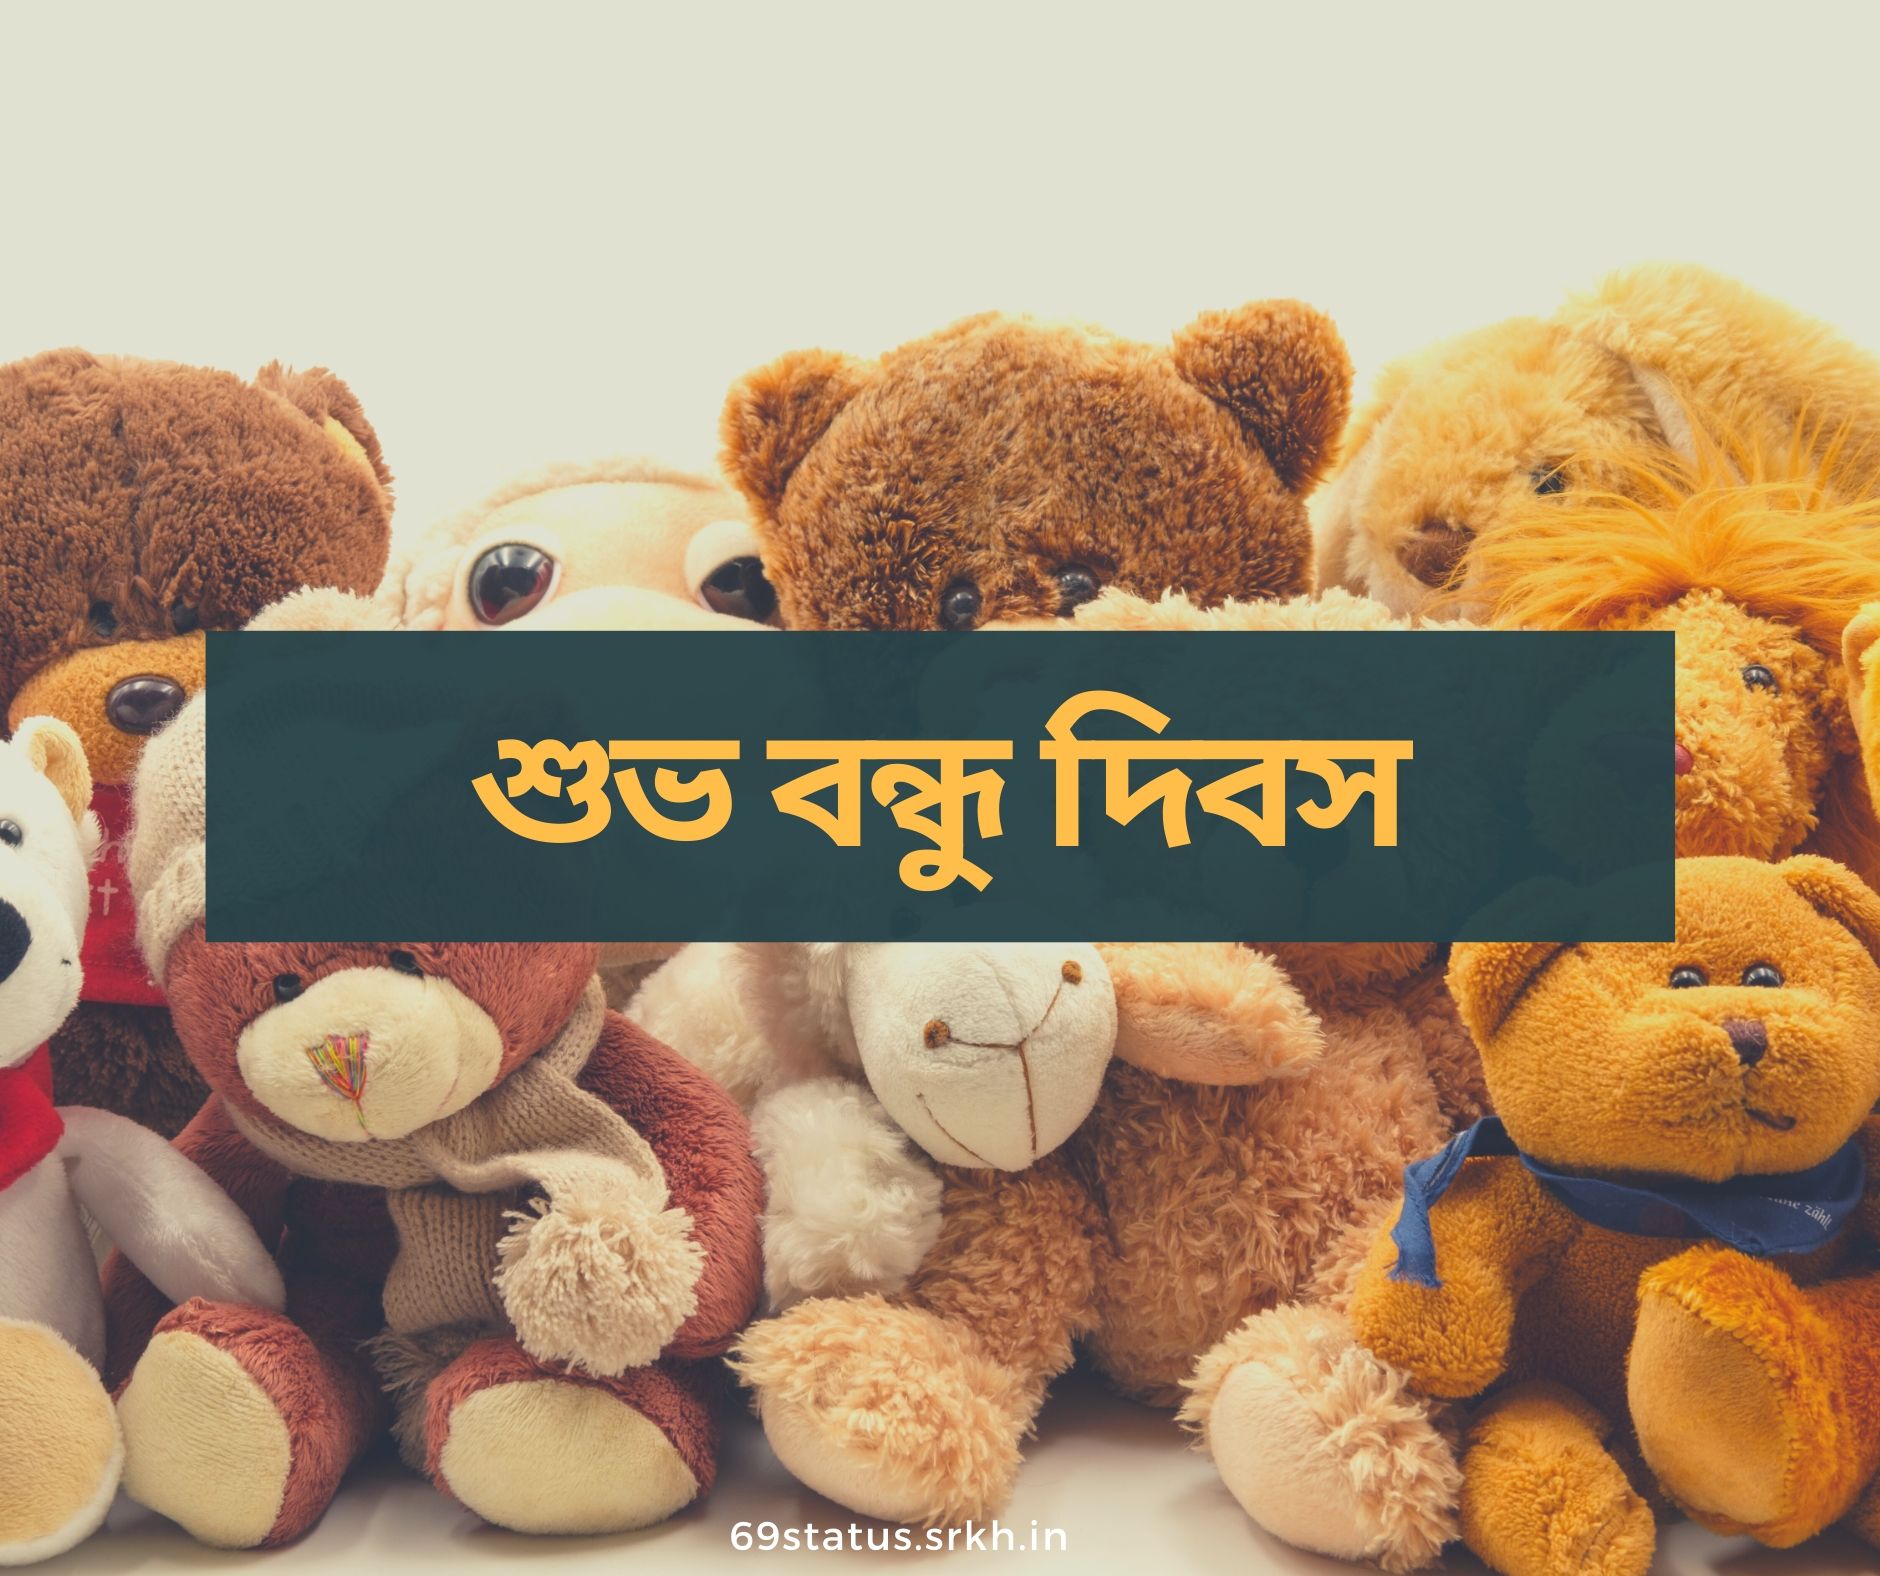 Happy Friendship Day Image in Bengali